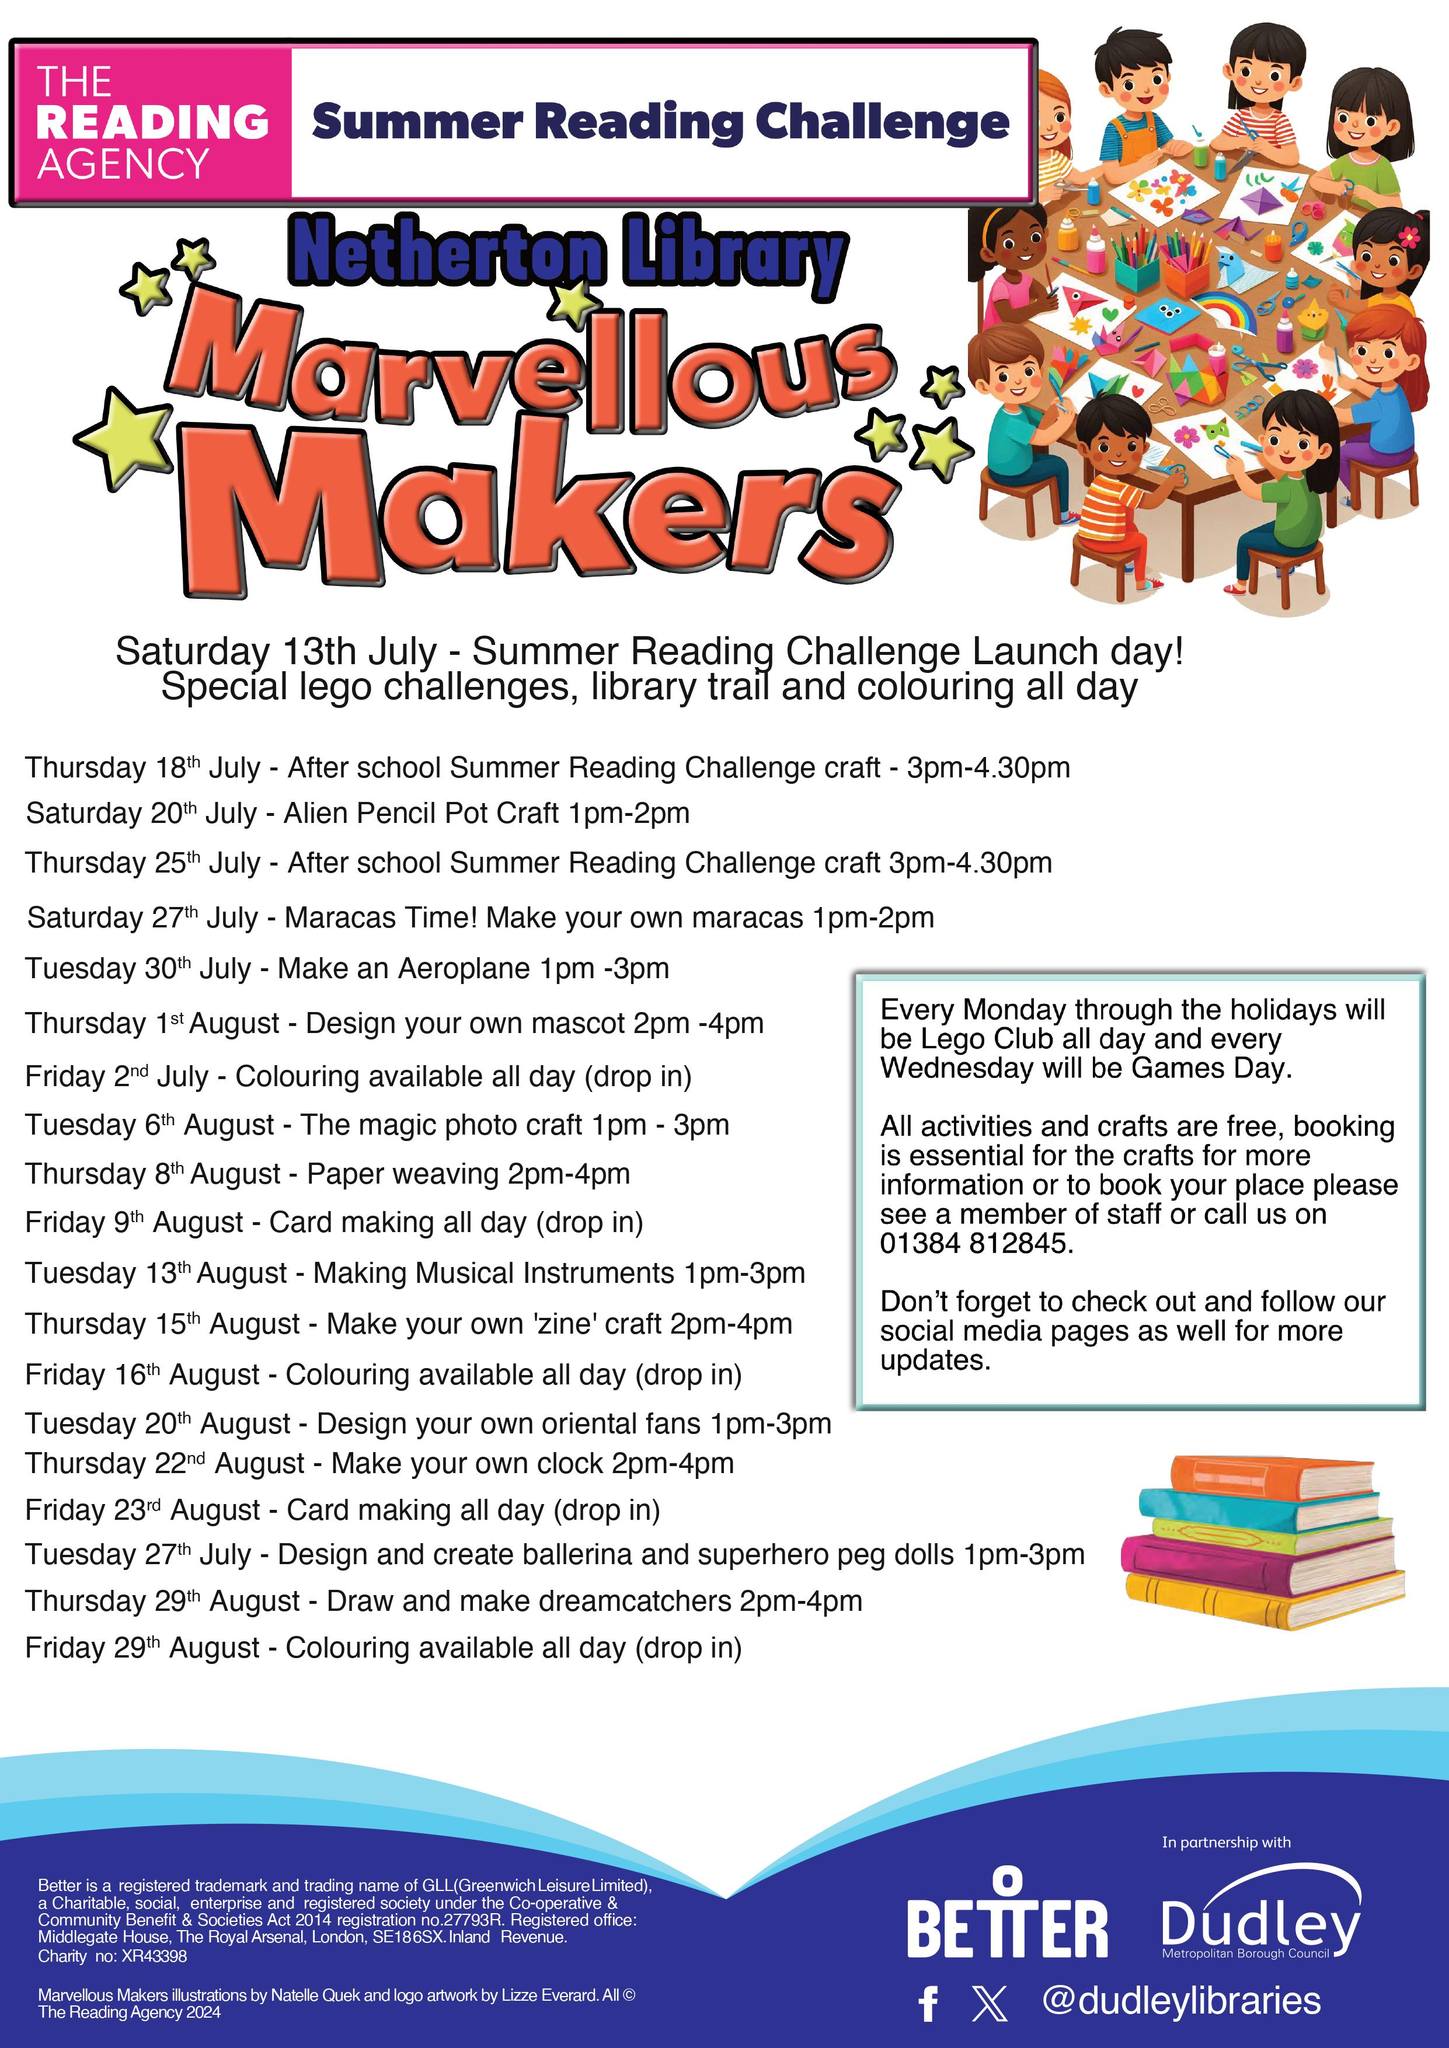 Netherton Library - Design your own Mascot